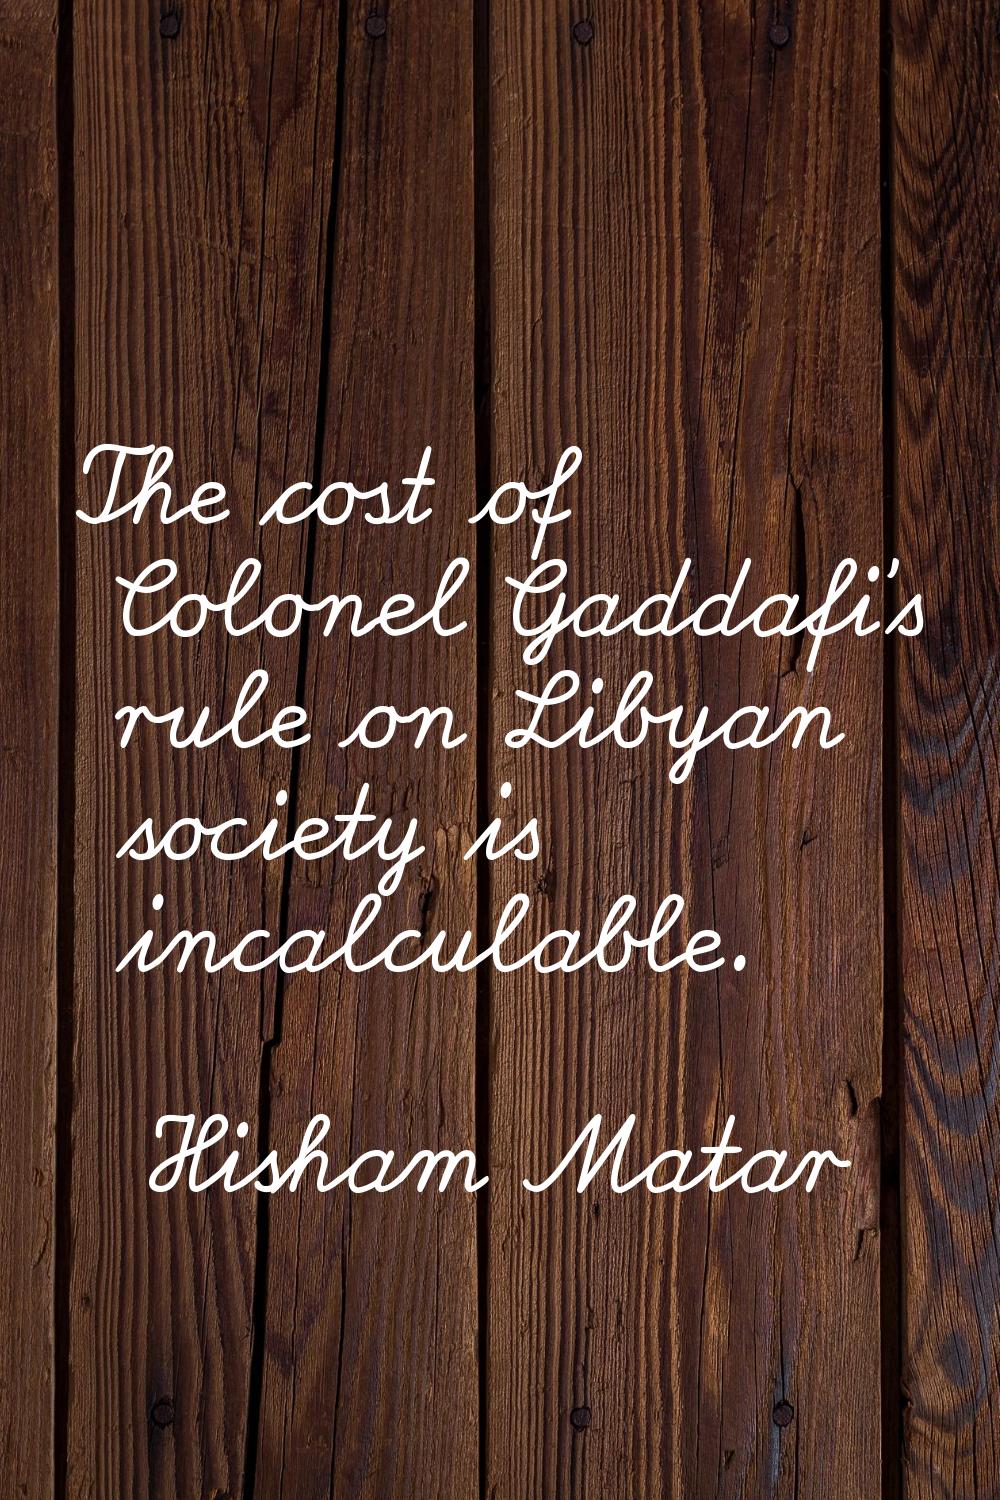 The cost of Colonel Gaddafi's rule on Libyan society is incalculable.